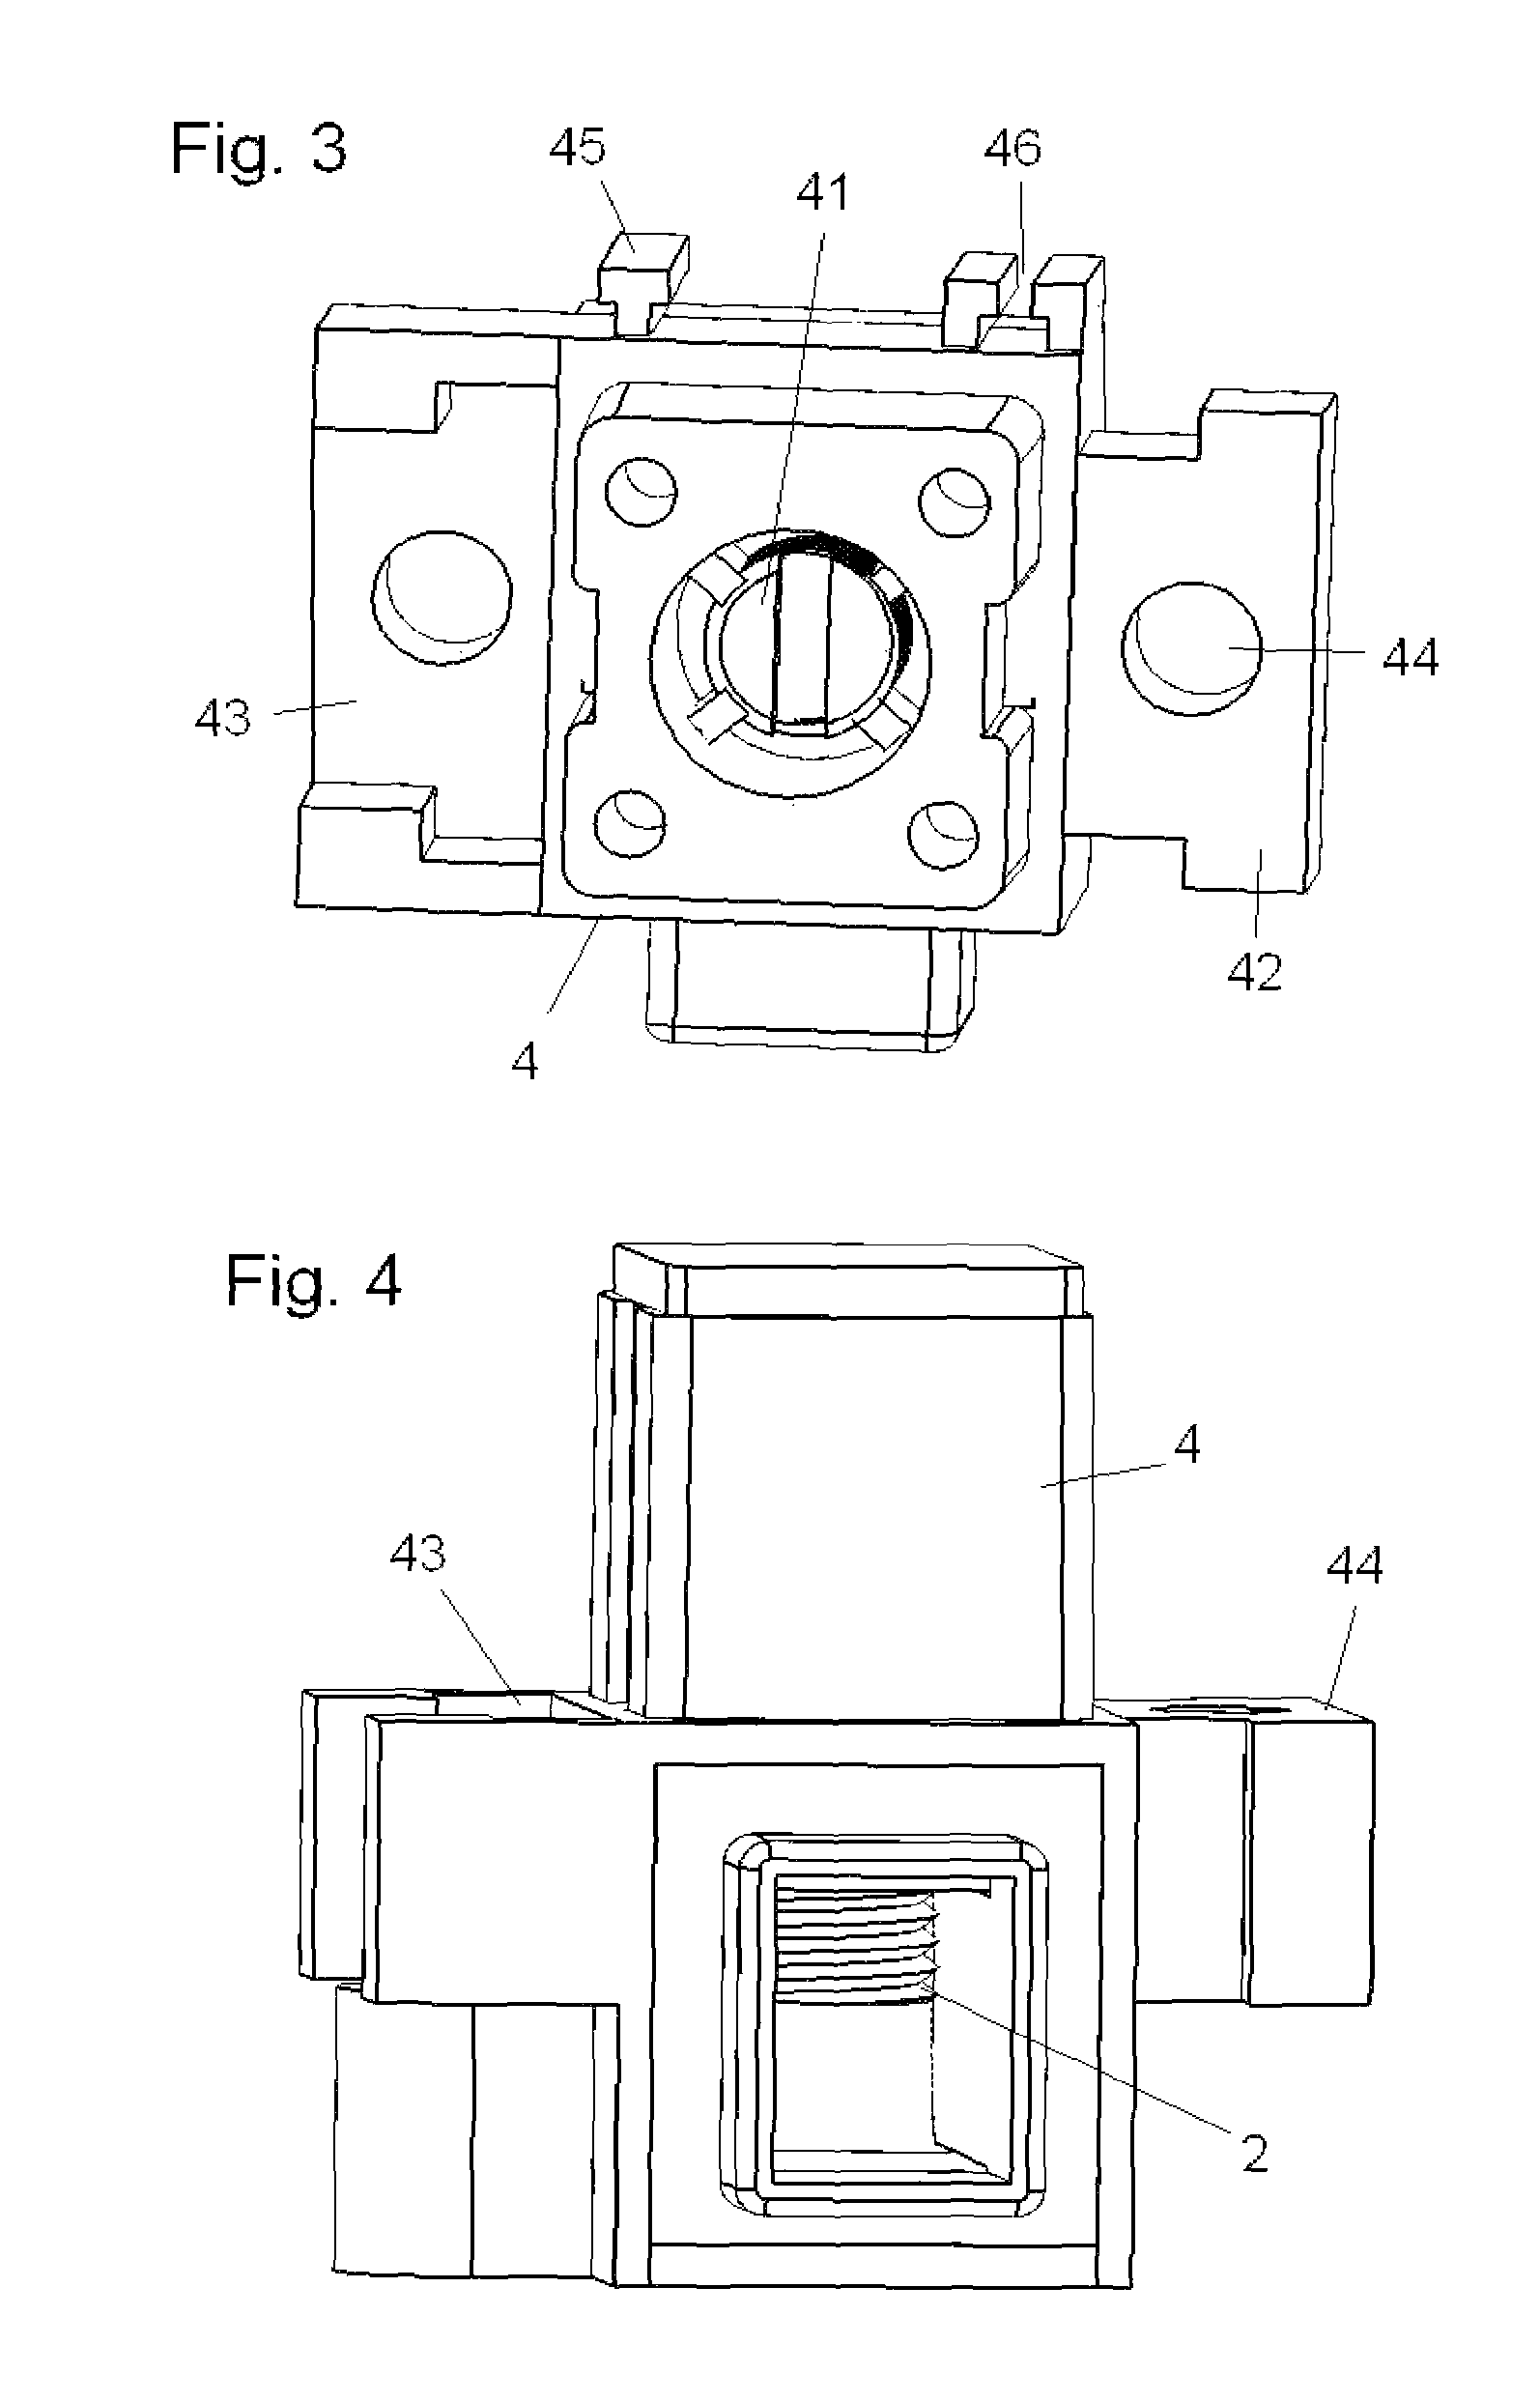 Modular connector for electric connections